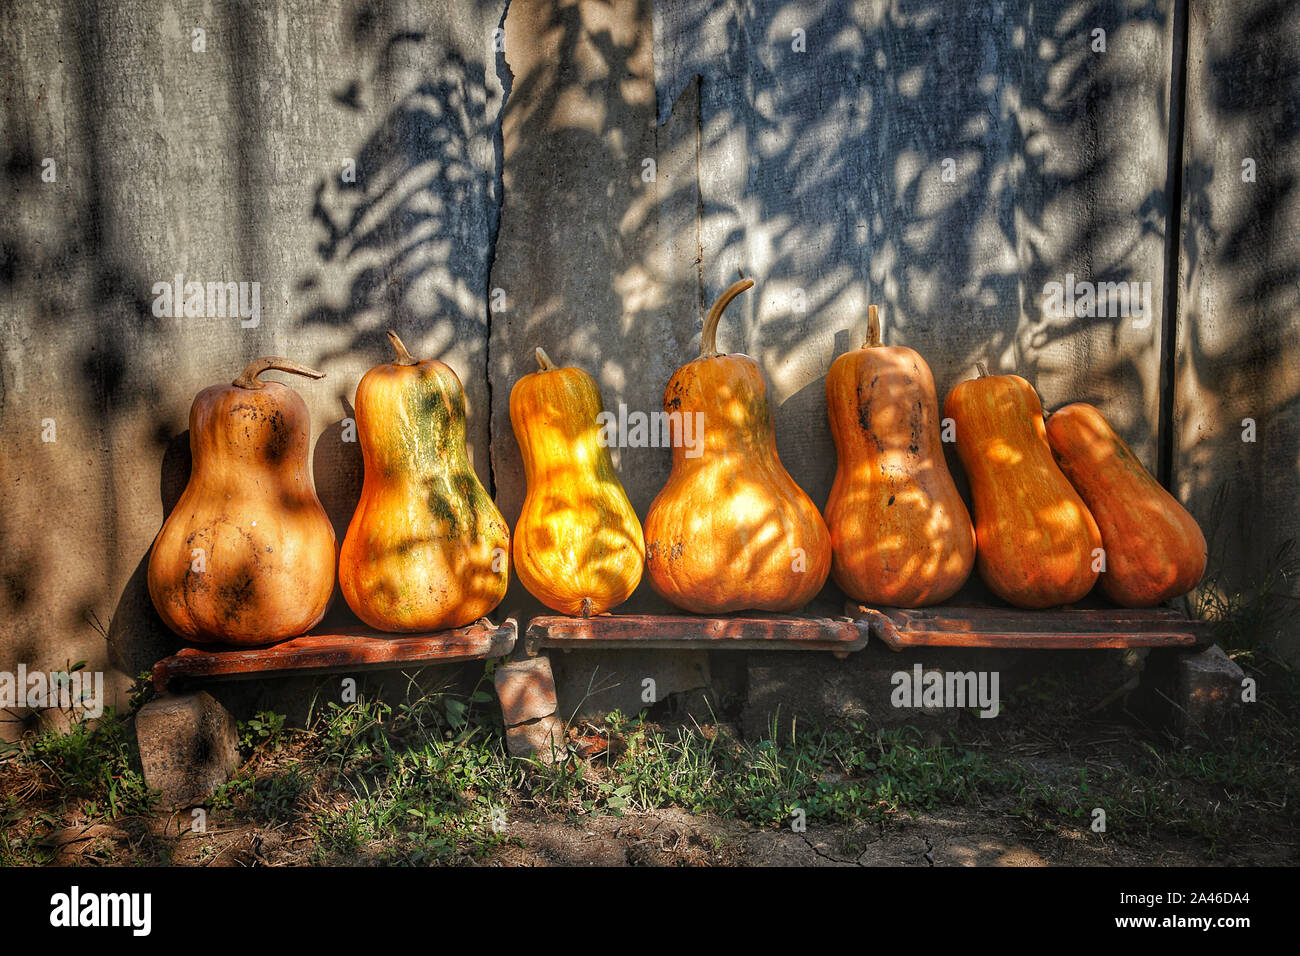 Pumpkins arranged on a shelf against the old wooden barn wall, background Stock Photo